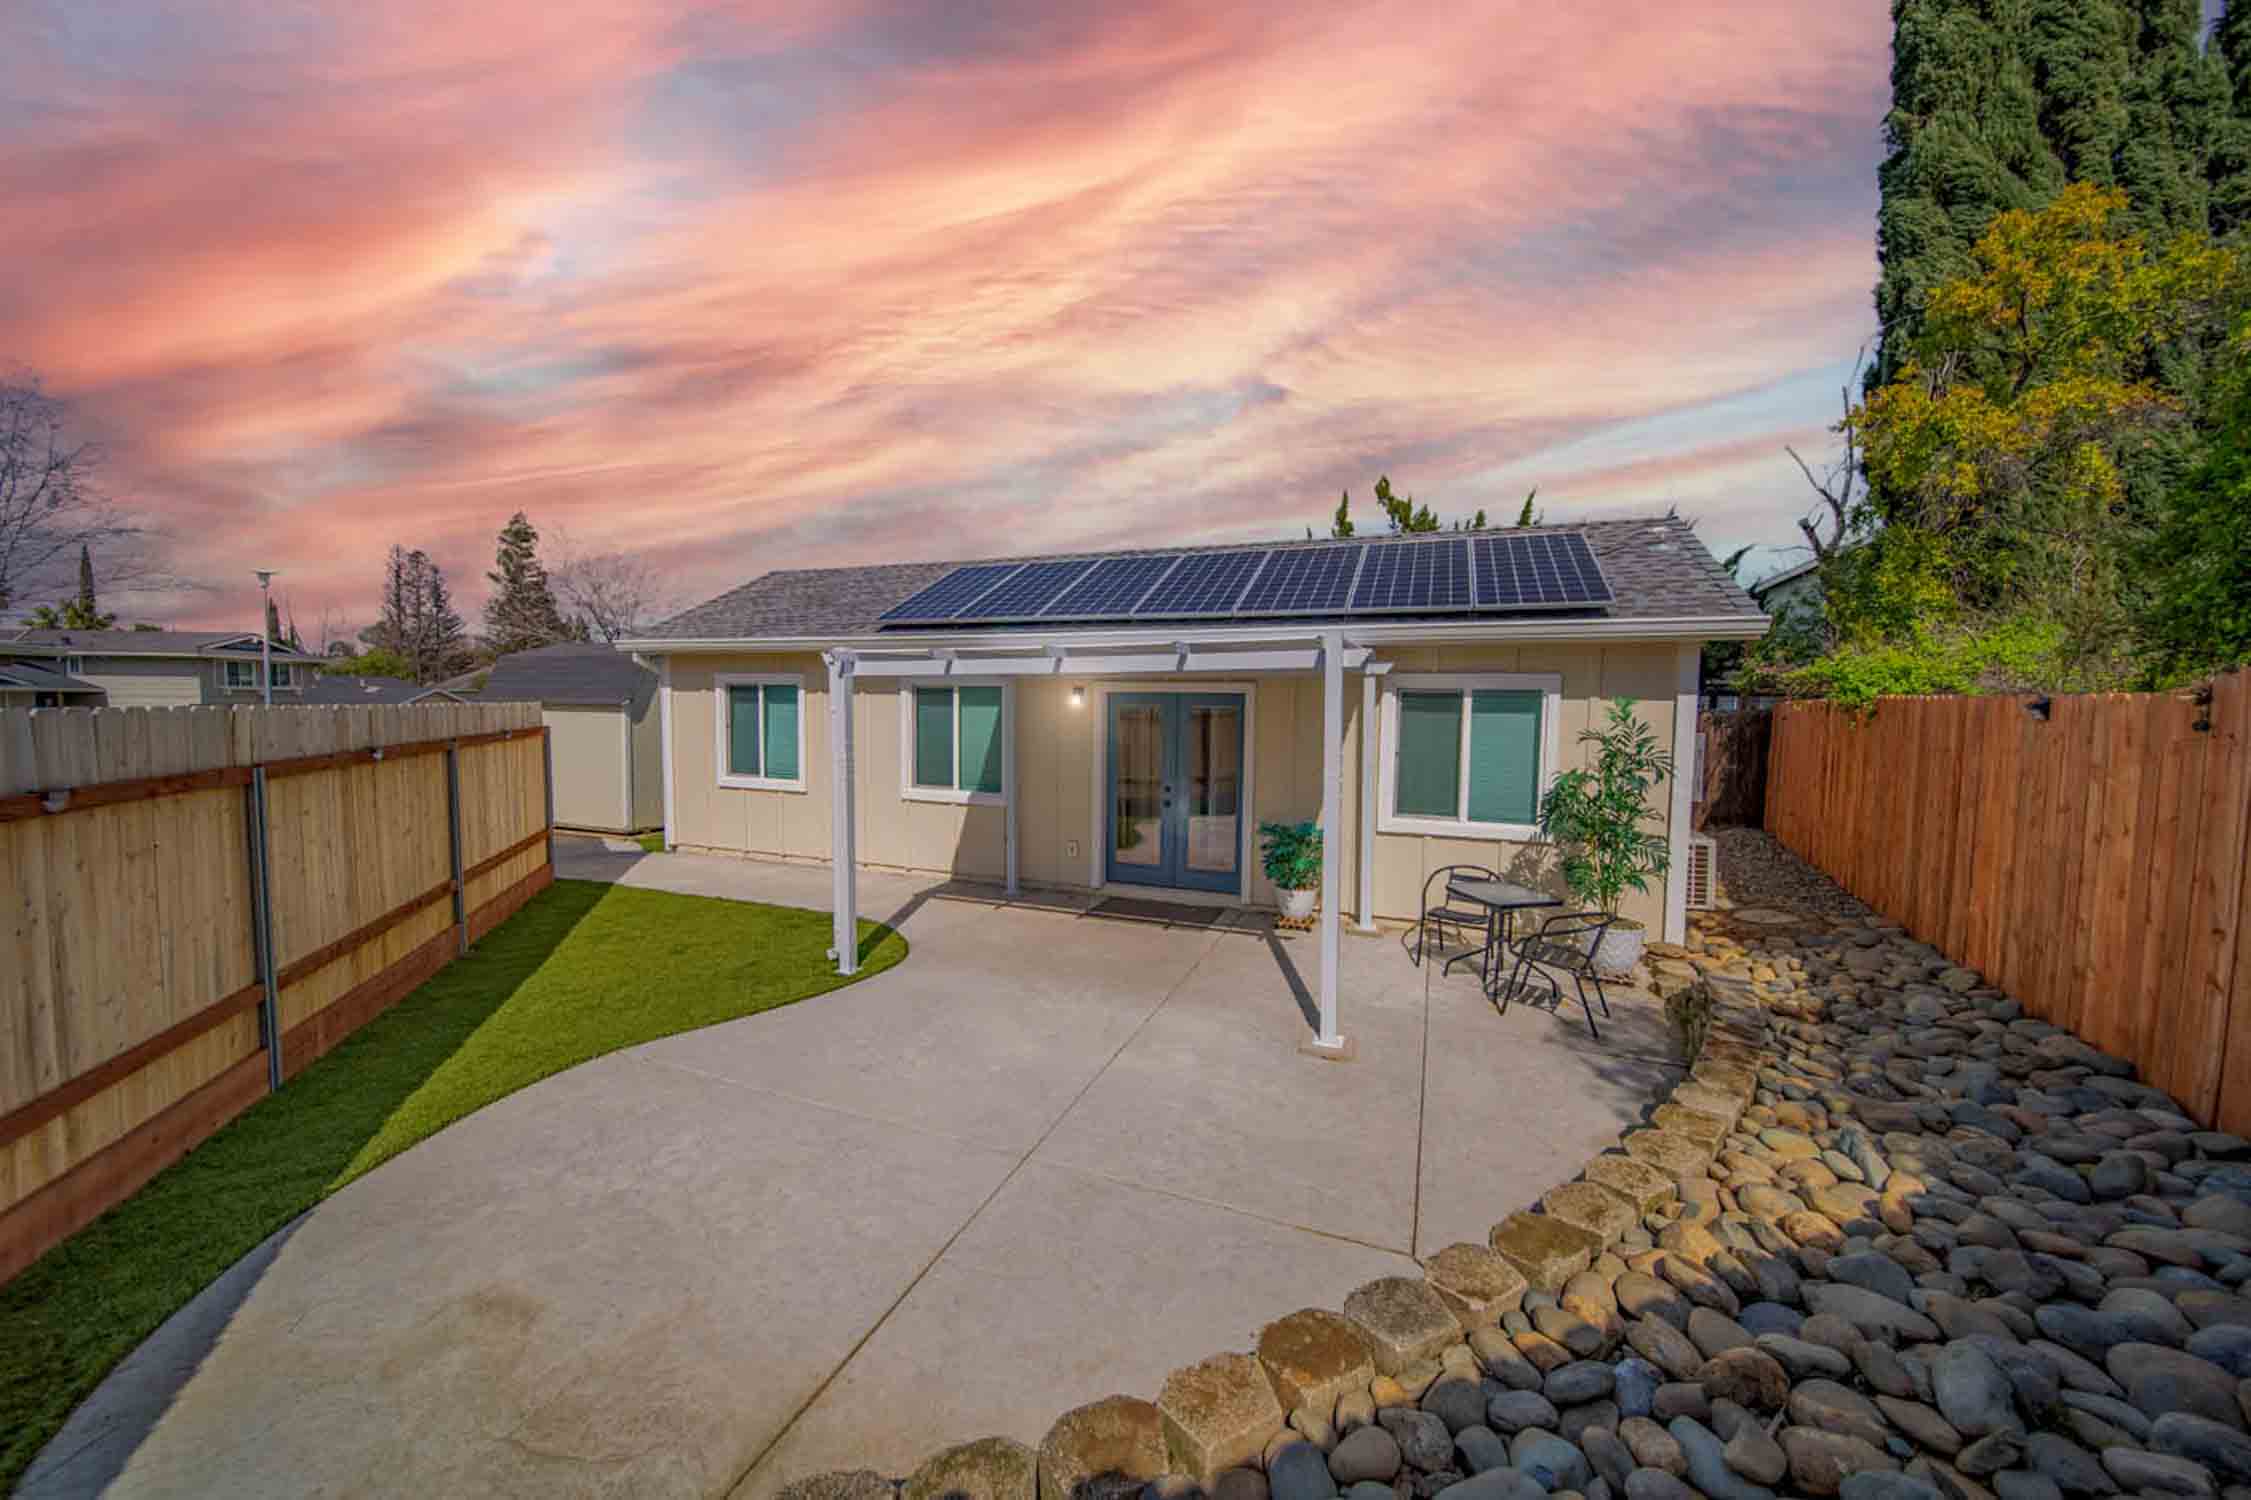 An ADU home with solar panels on the roof provided by top our top ADU builder in Portland.